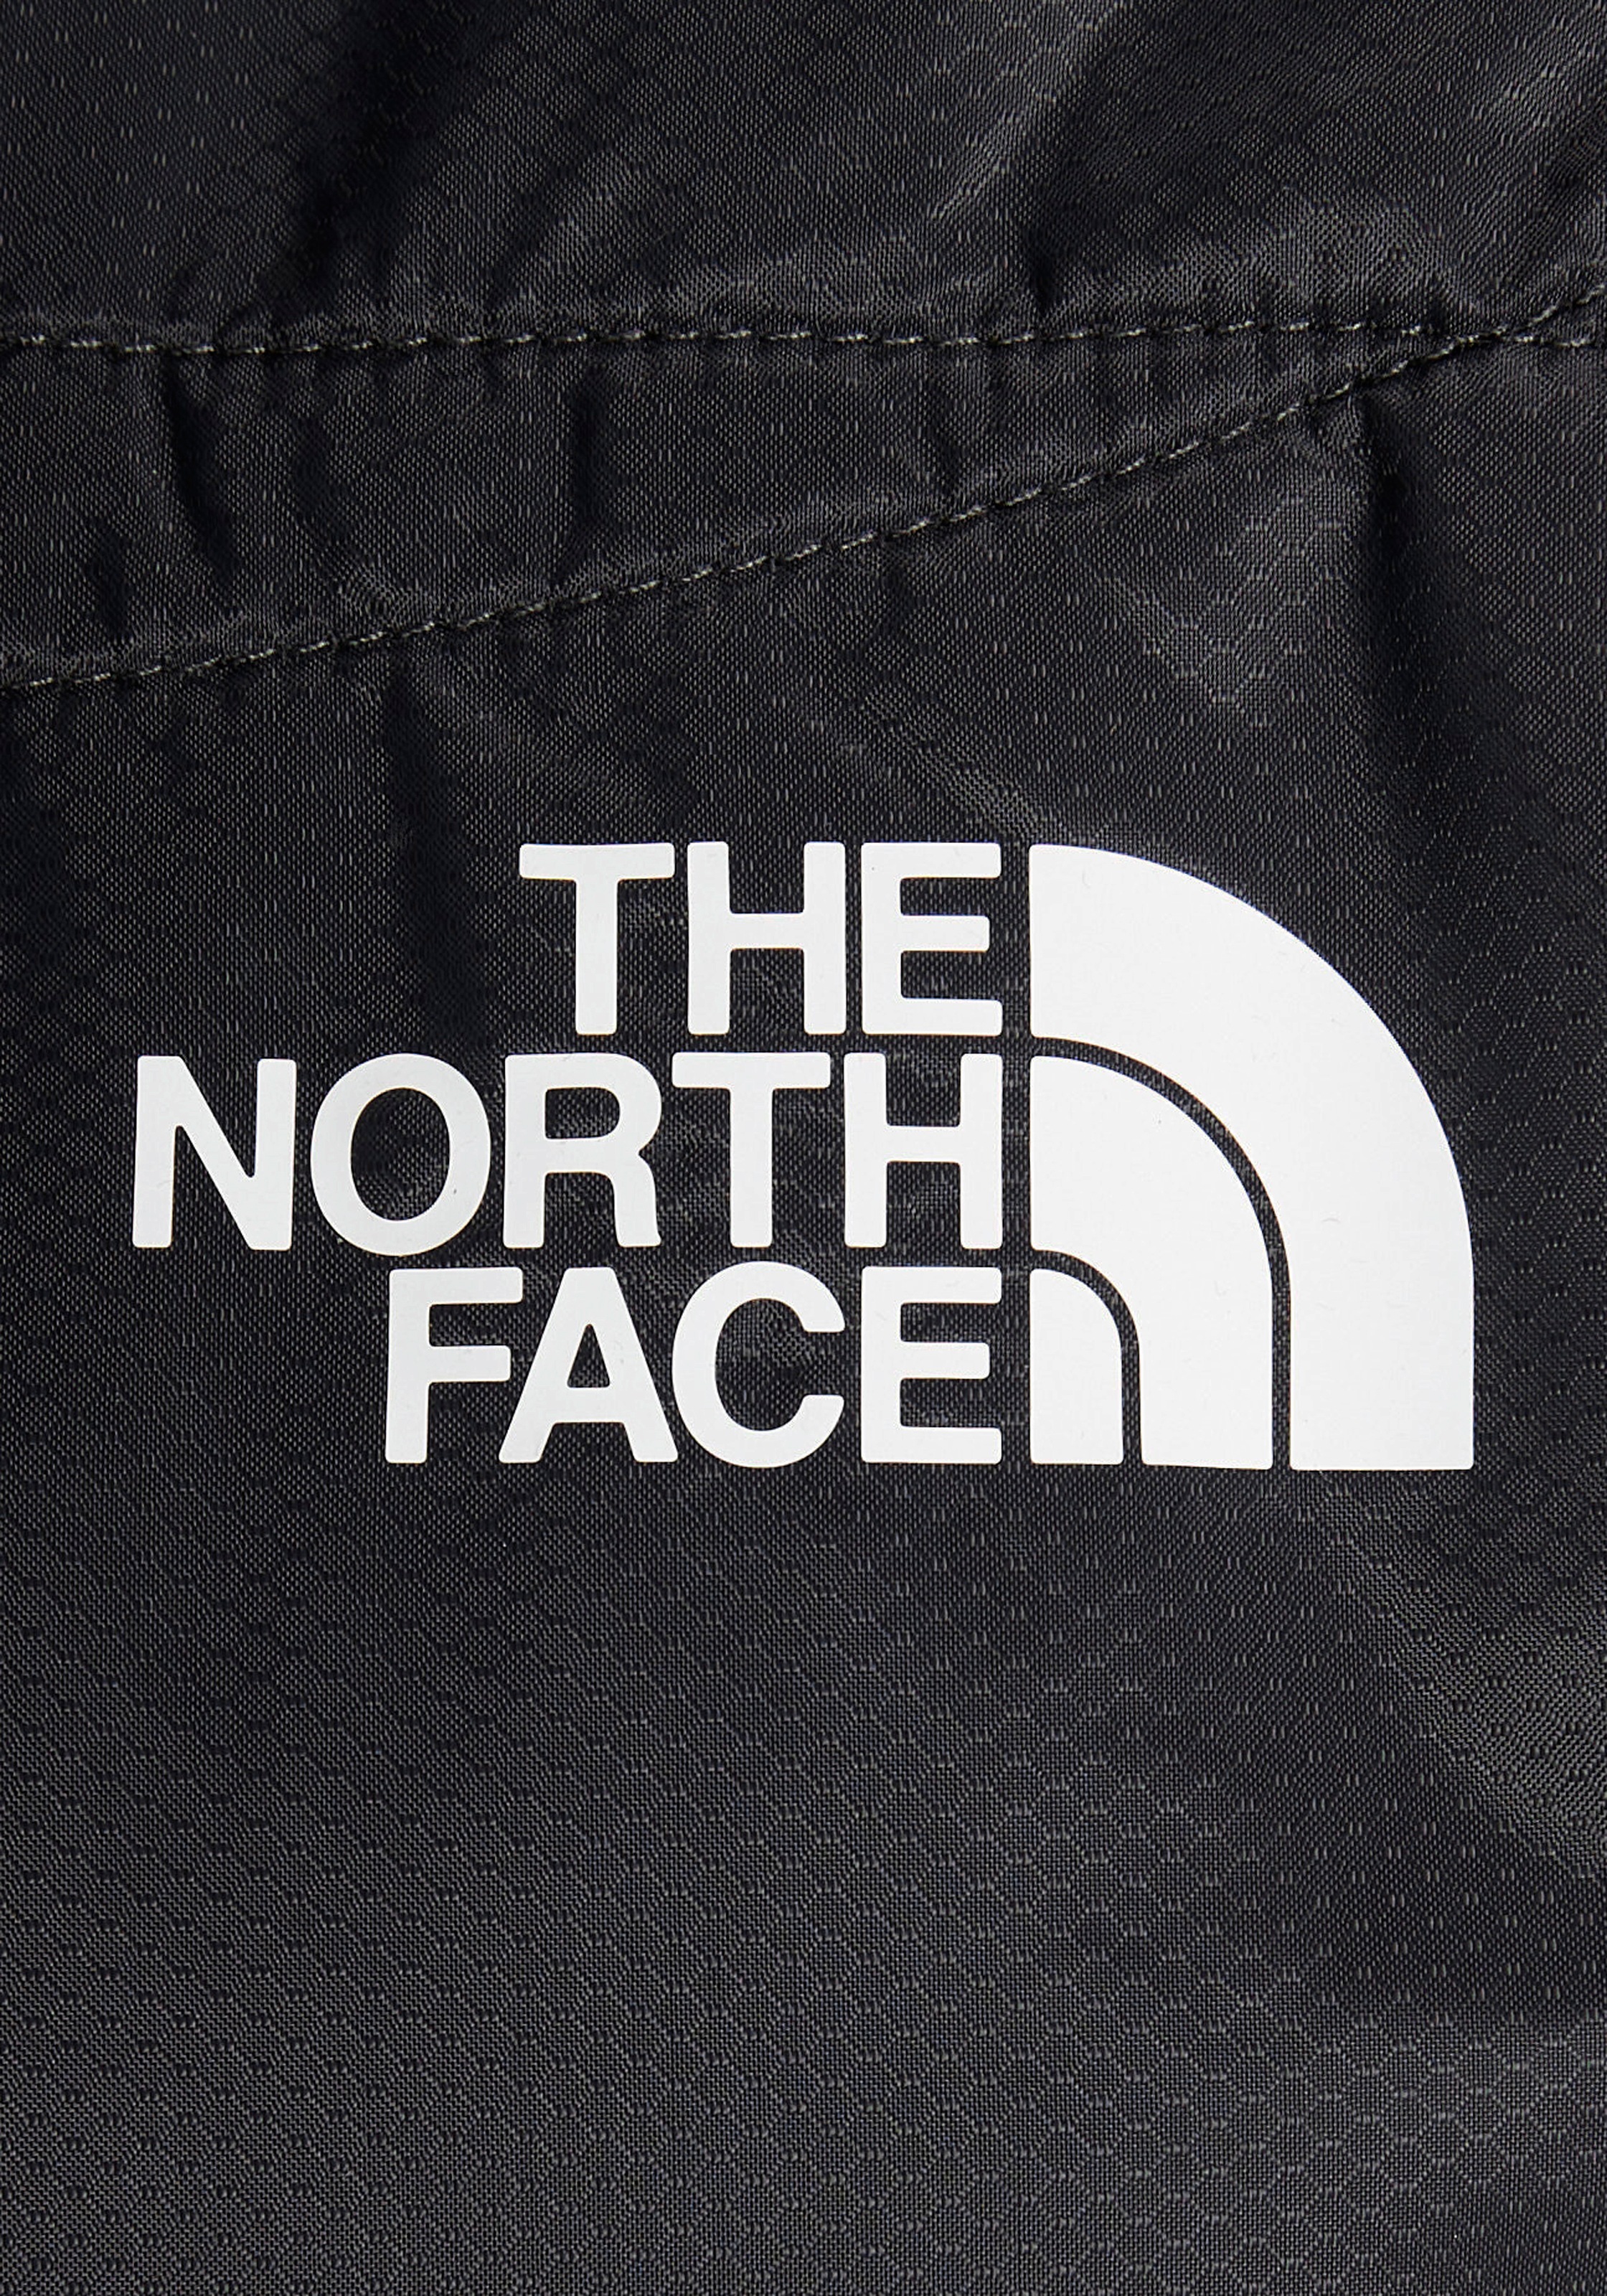 The North Face Funktionsjacke »M bei Logodruck SYNTHETIC JACKET«, QUEST mit